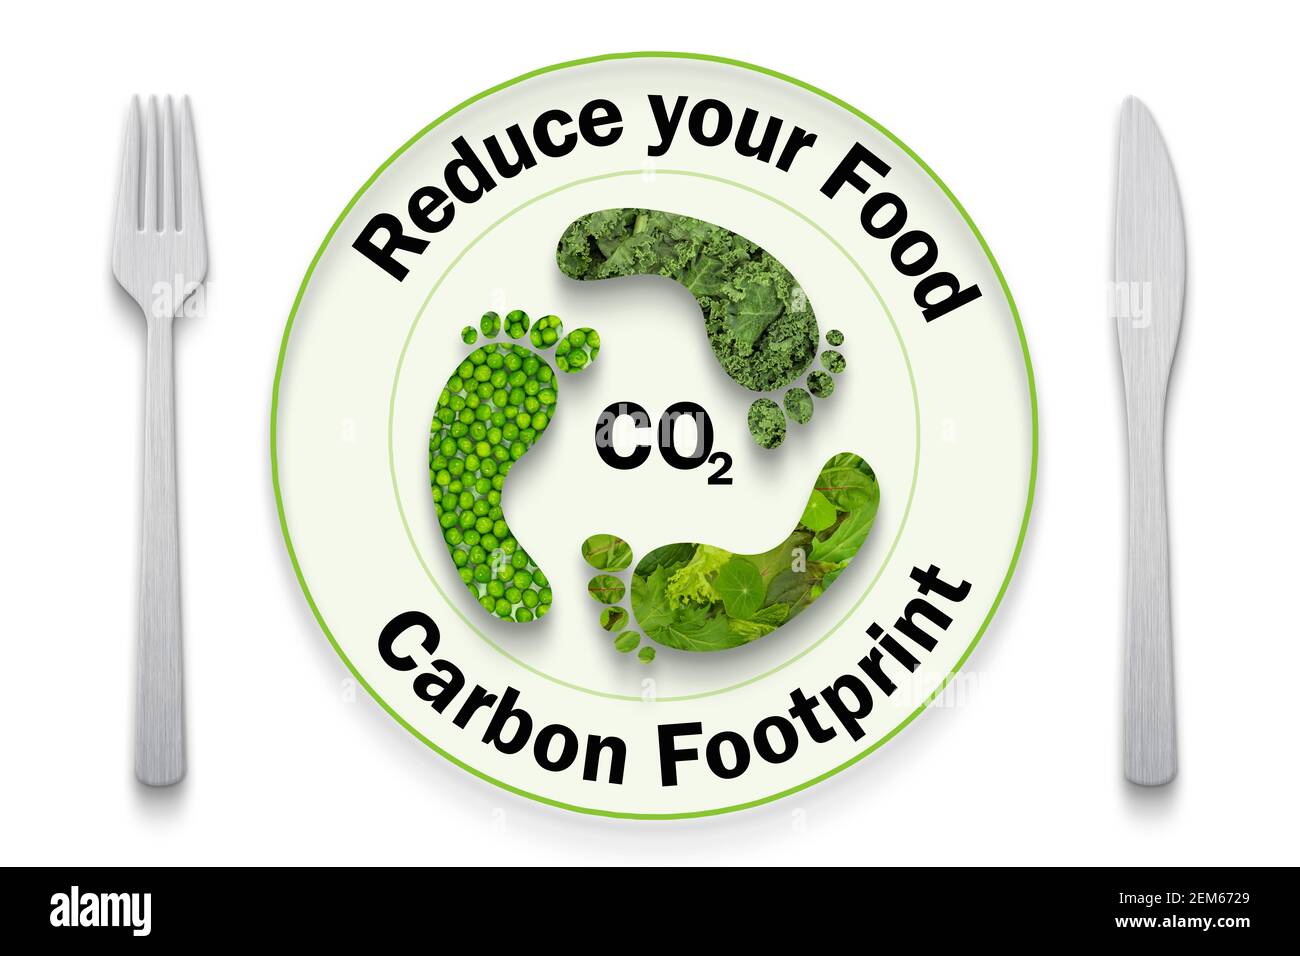 Reduce the carbon footprint of your food, foot icon on plate with cutlery,  sustainable and ethical consumption Stock Photo - Alamy